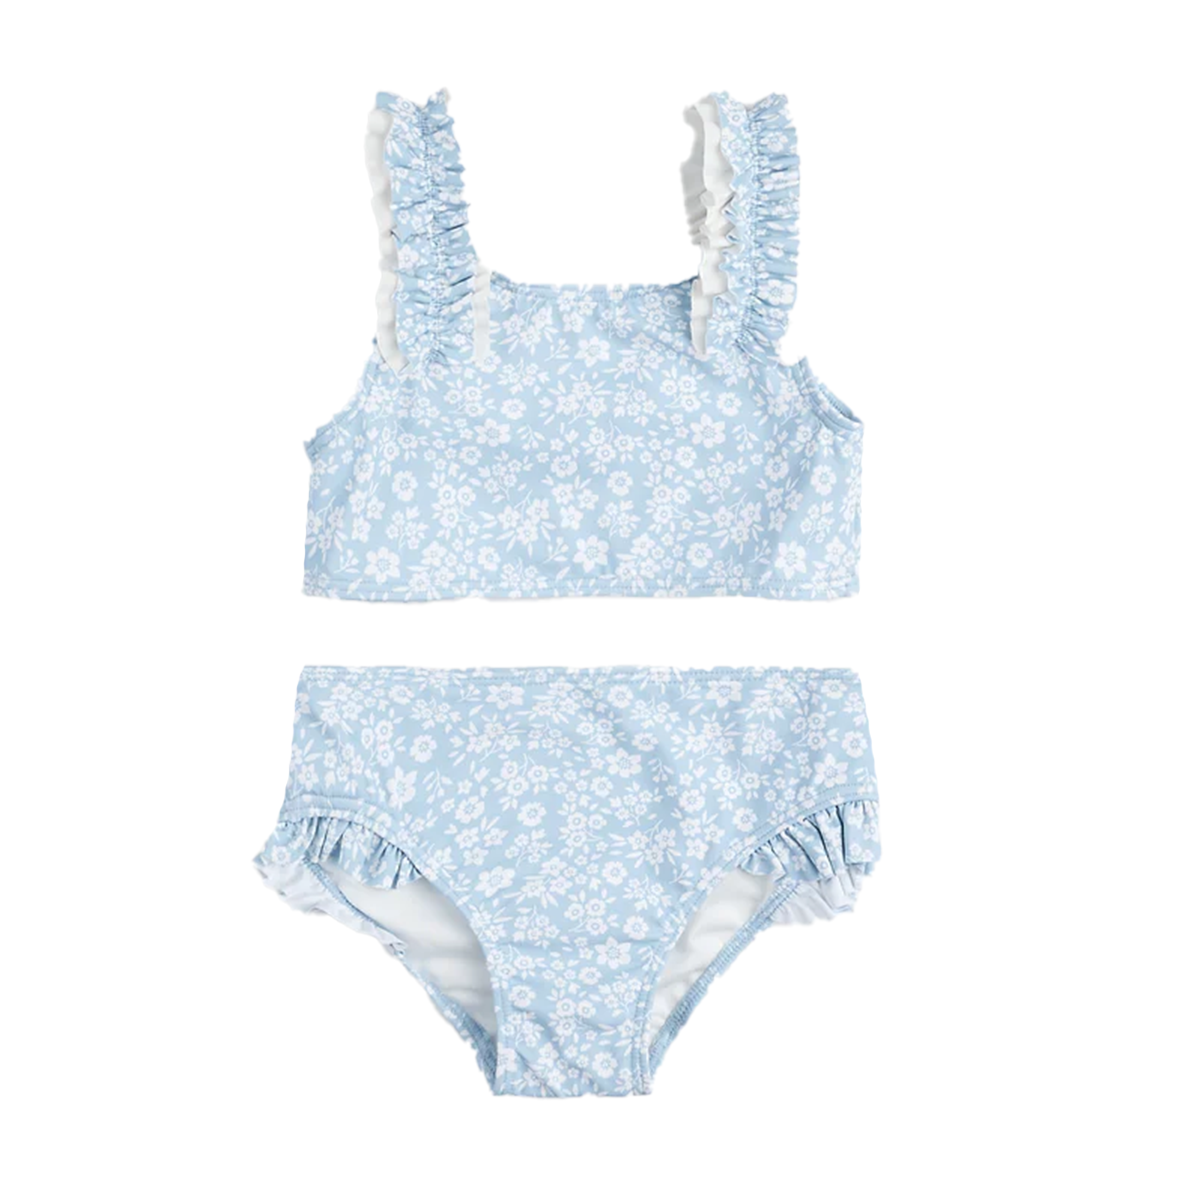 Toddler Girl's Sky Blue Floral Print Two-Piece Swimsuit